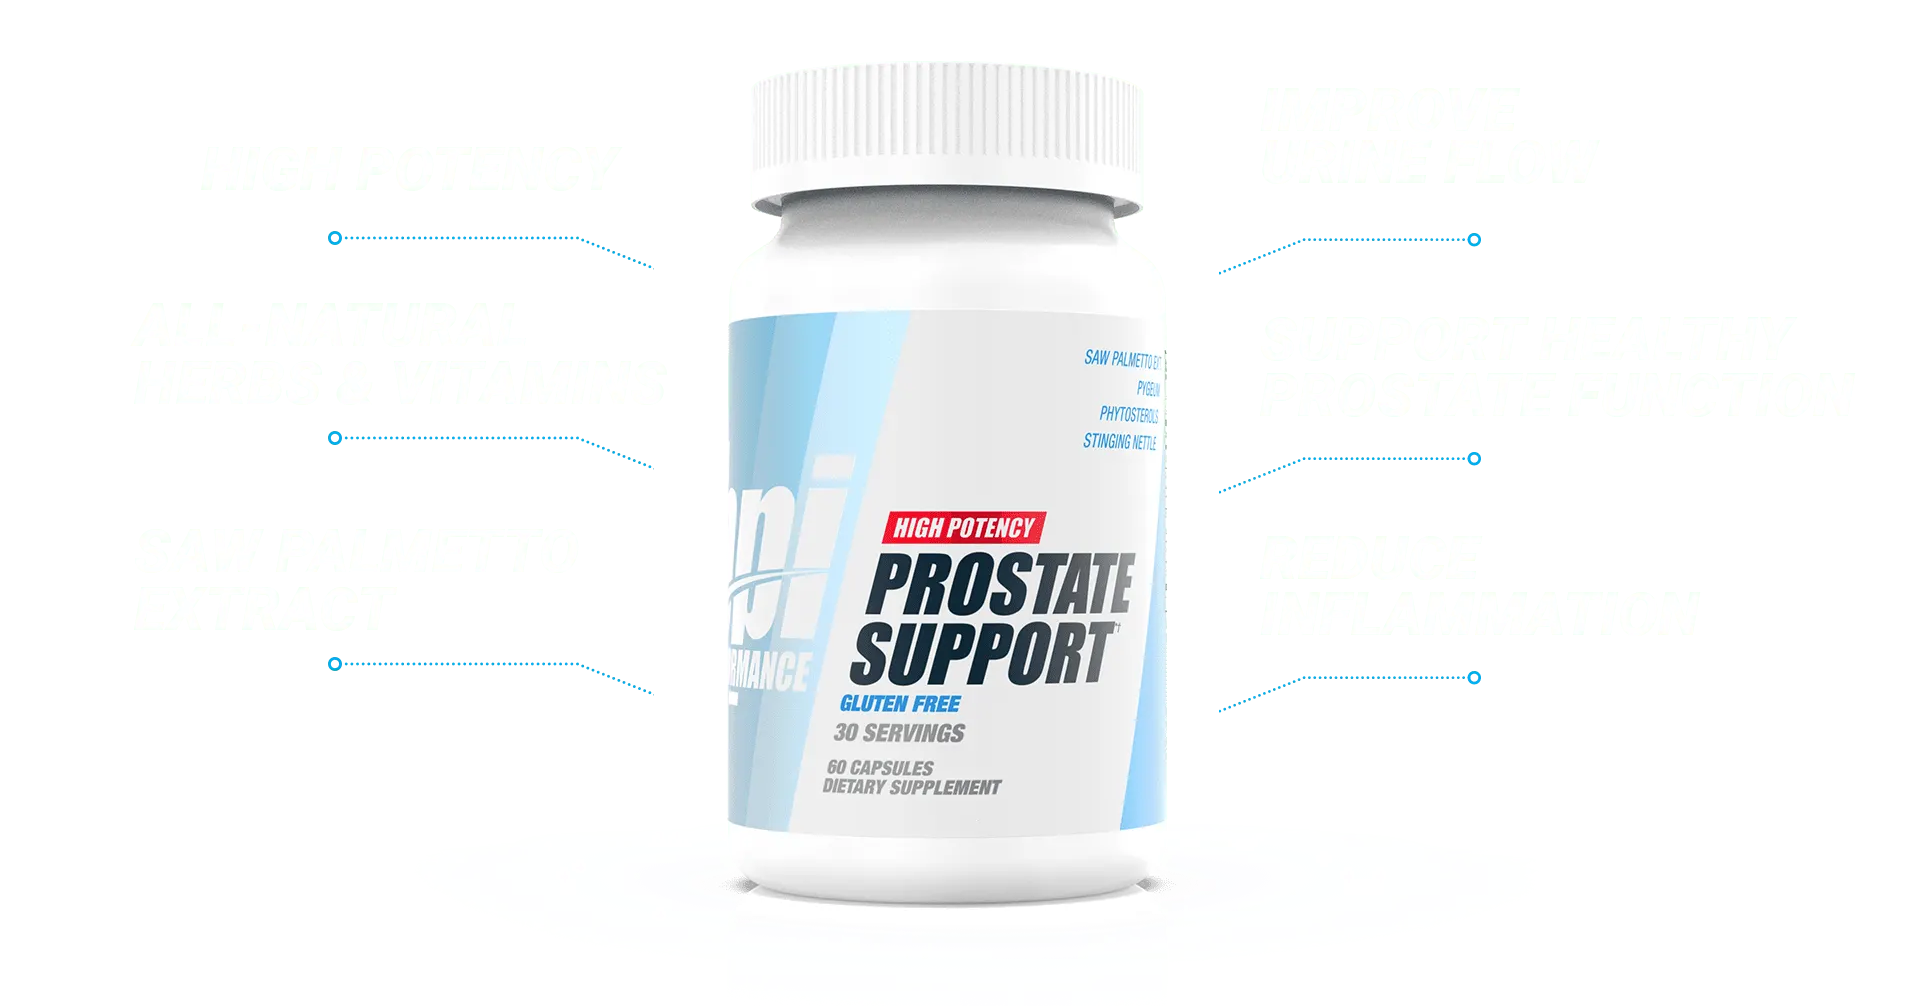 Capsule bottle of Prostate Support with benefits